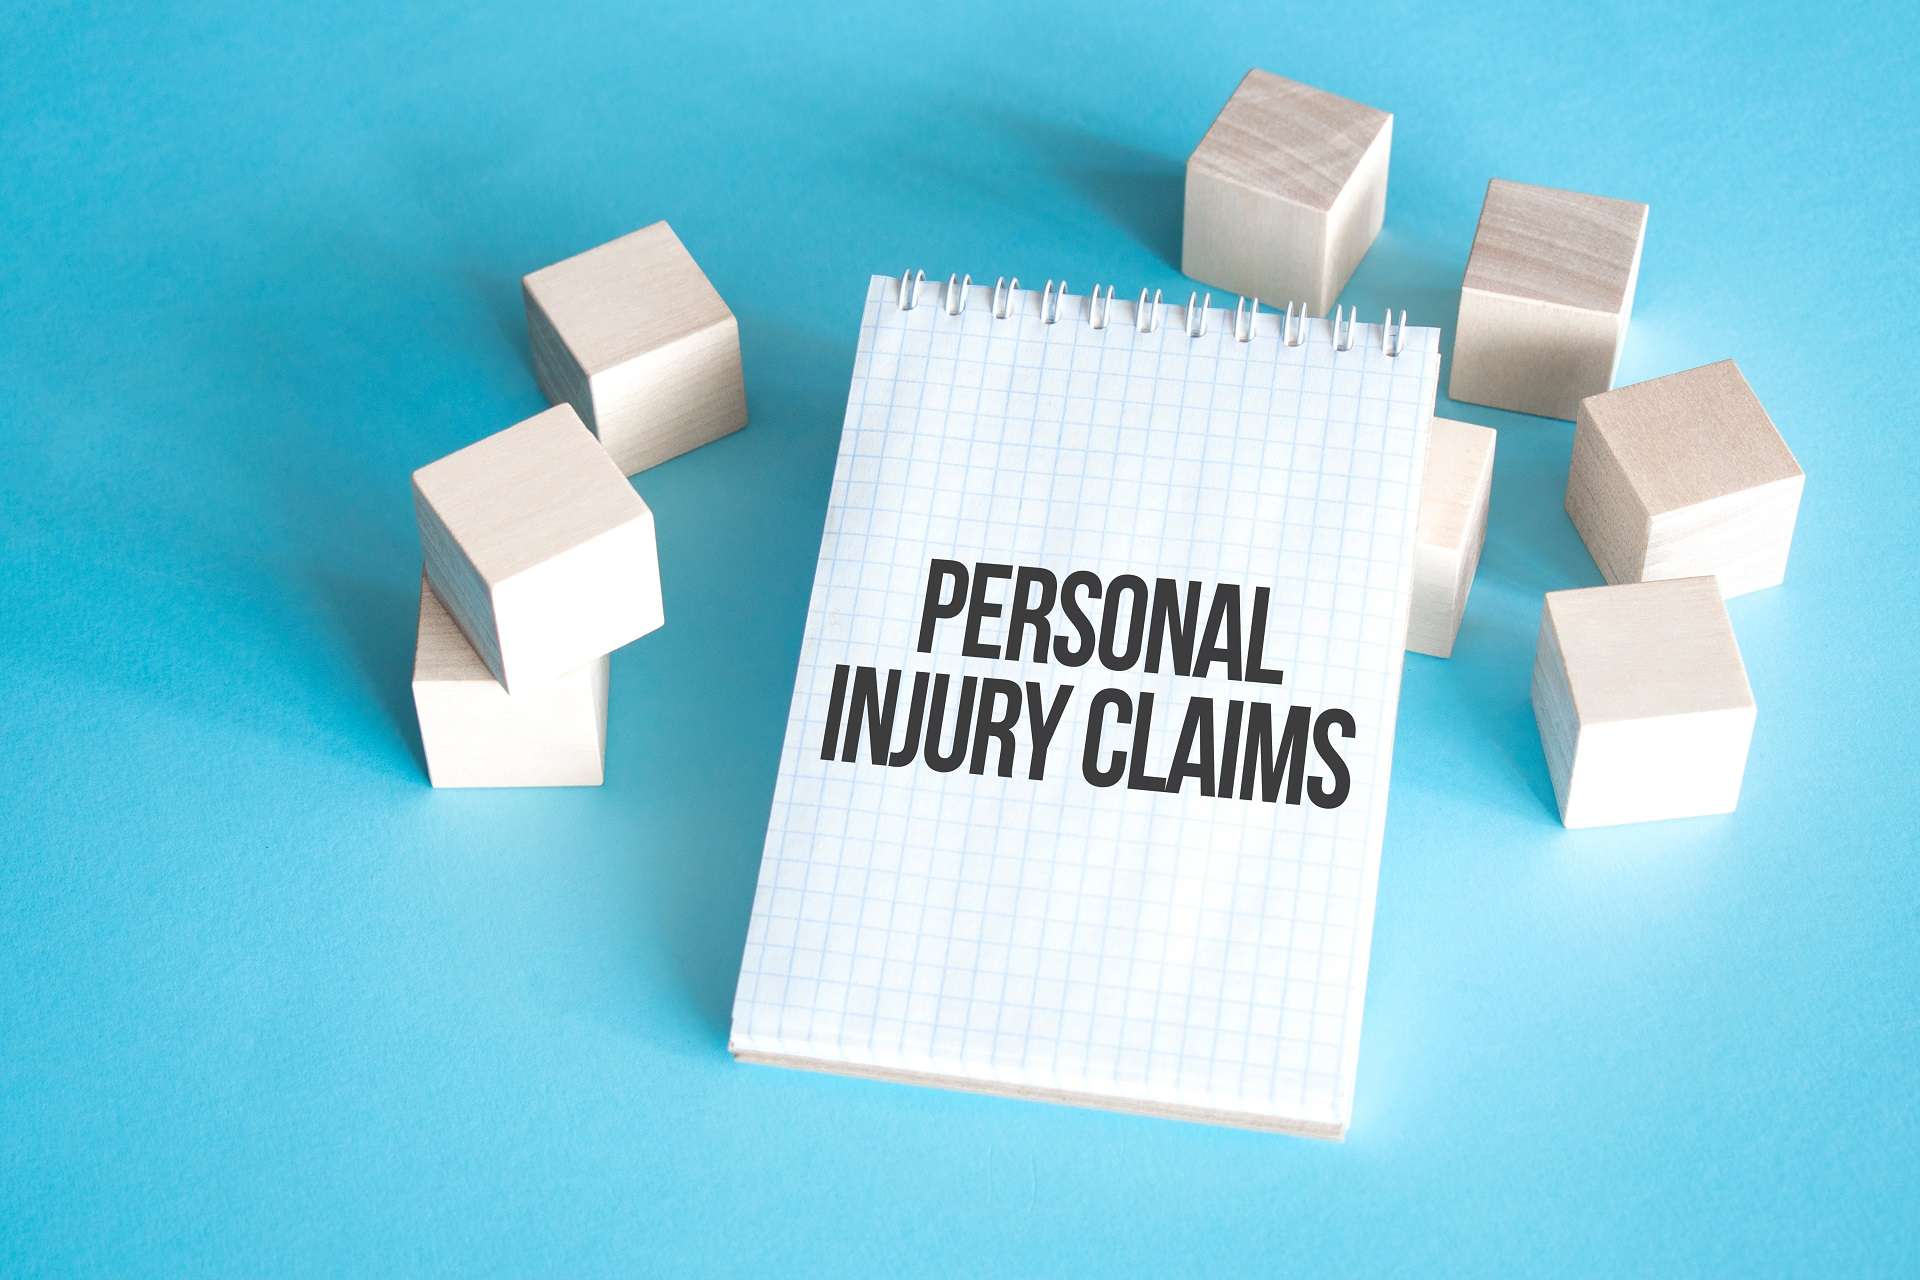 Personal injury claims